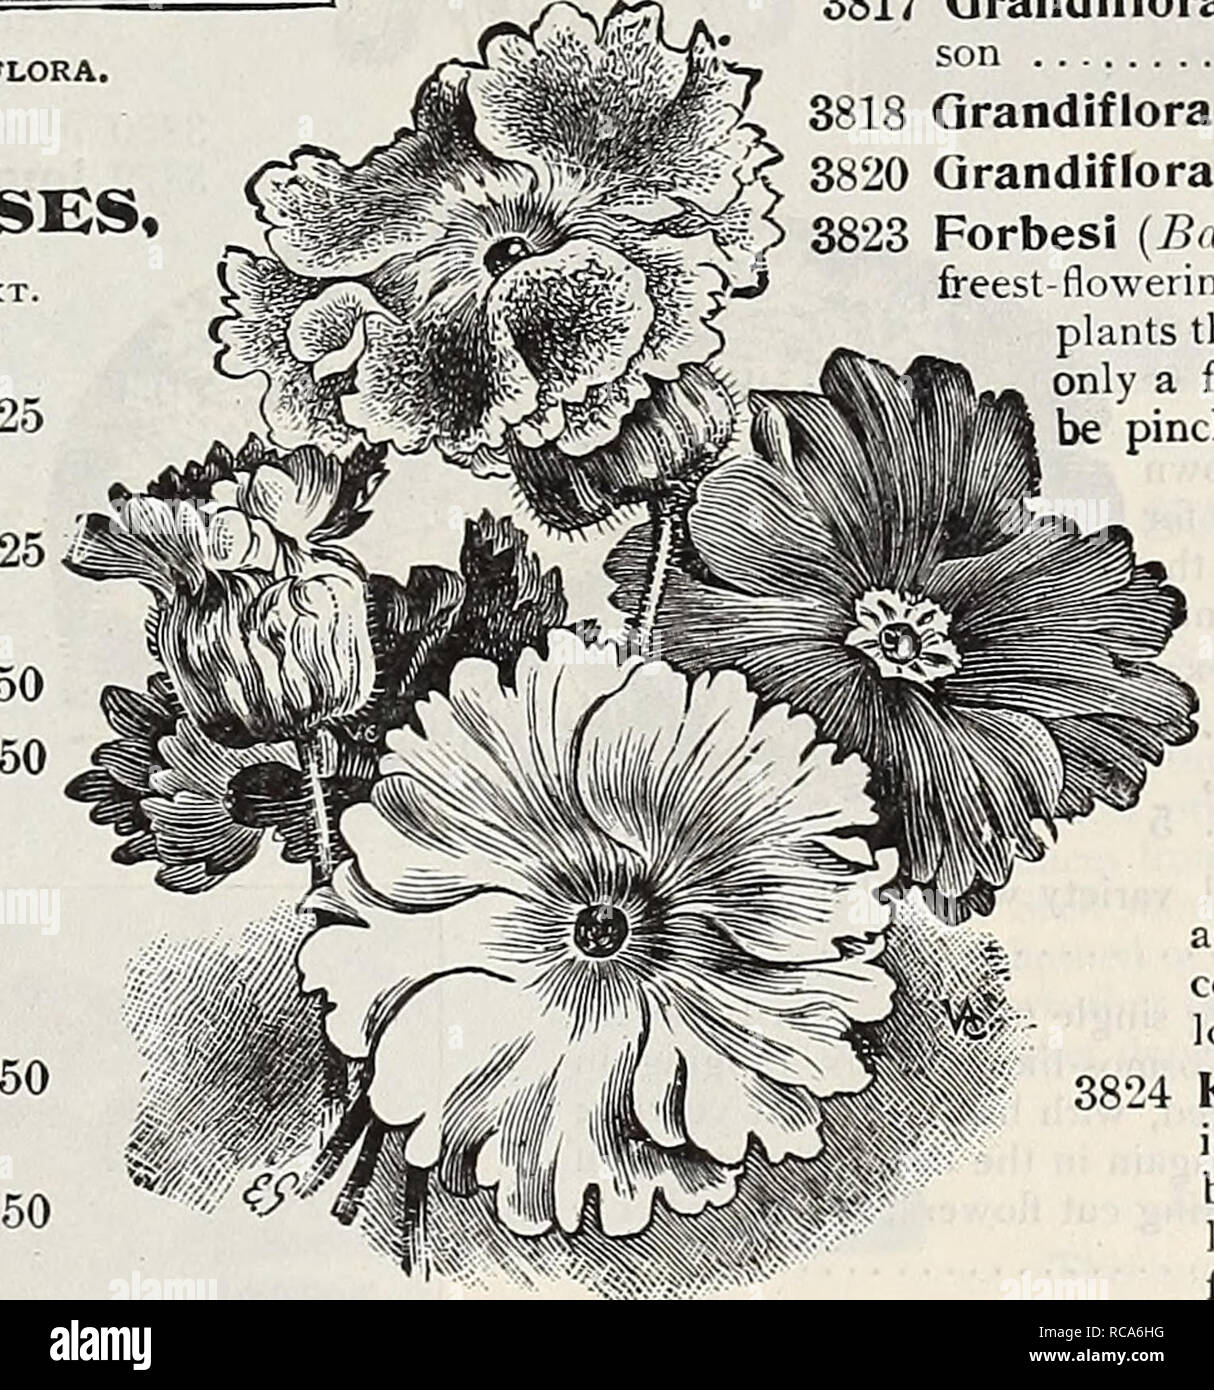 . Dreer's garden book : seventy-third annual edition 1911. Seeds Catalogs; Nursery stock Catalogs; Gardening Equipment and supplies Catalogs; Flowers Seeds Catalogs; Vegetables Seeds Catalogs; Fruit Seeds Catalogs. Primula Obconica Grandiflora. Large=flowering CHINESE PRIMROSES, PER PKT. 3782 Alba Magnifica. The finest pure white 25 3783 Covent Garden Red. 'A fine rosy red 25 3787 Rosy Horn. Beautiful deli- cate pink 50 Holborn Blue. Unique shade. 50 Stellata. A very pretty form with large heads of star-shaped flowers of various colors; a splendid type for decorative pur- poses Double=flowerin Stock Photo